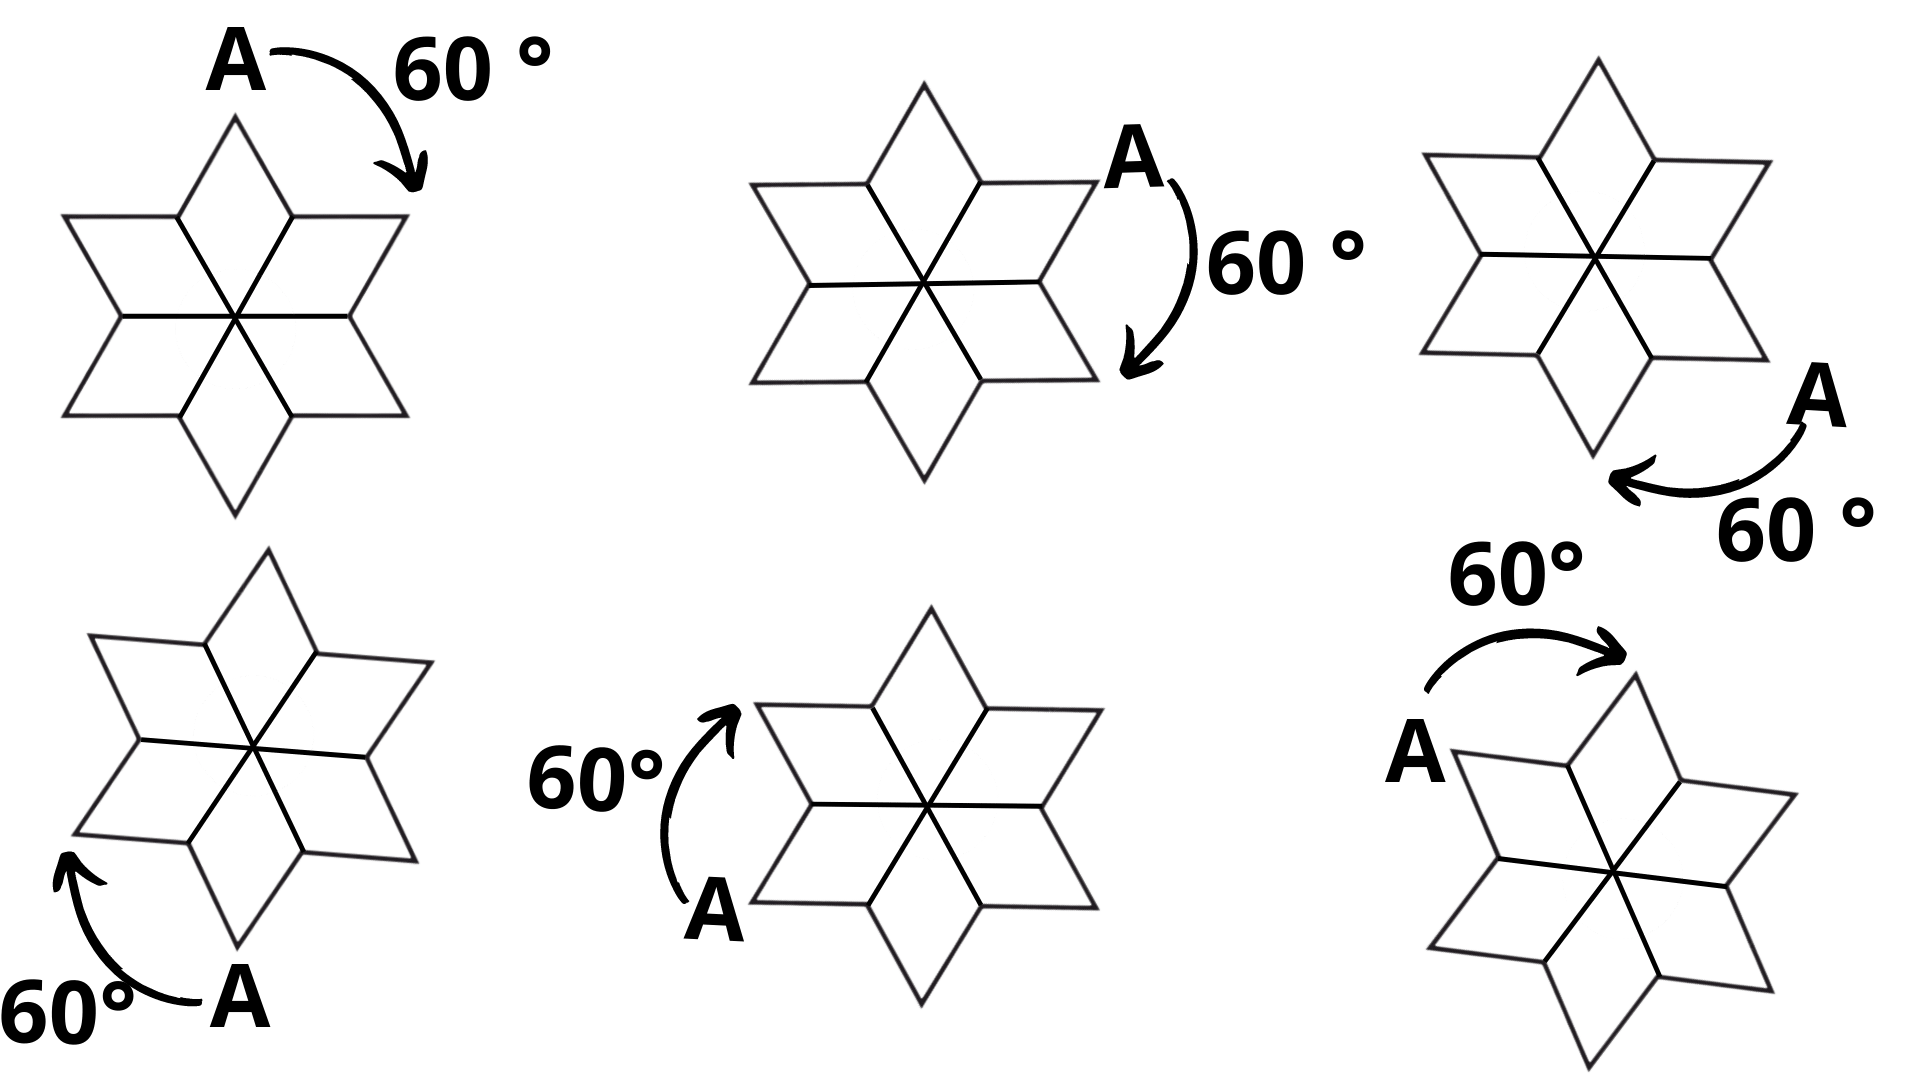 Rotation of Star Shaped Geometry by 60 degree